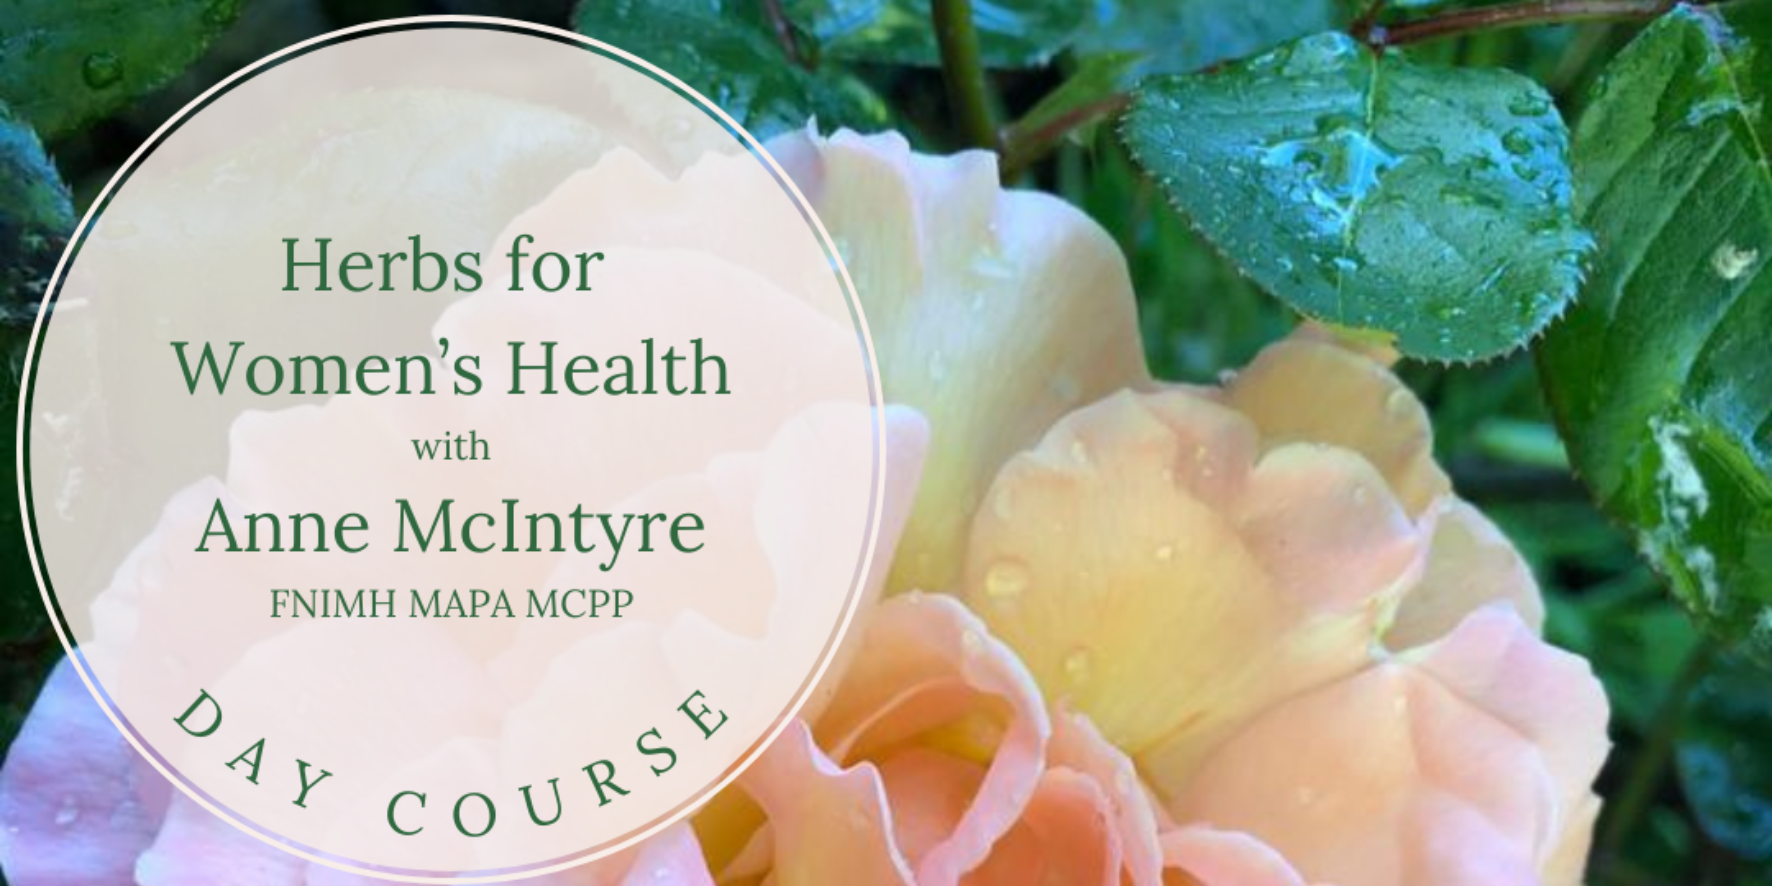 Herbs for Women’s Health with Anne McIntyre